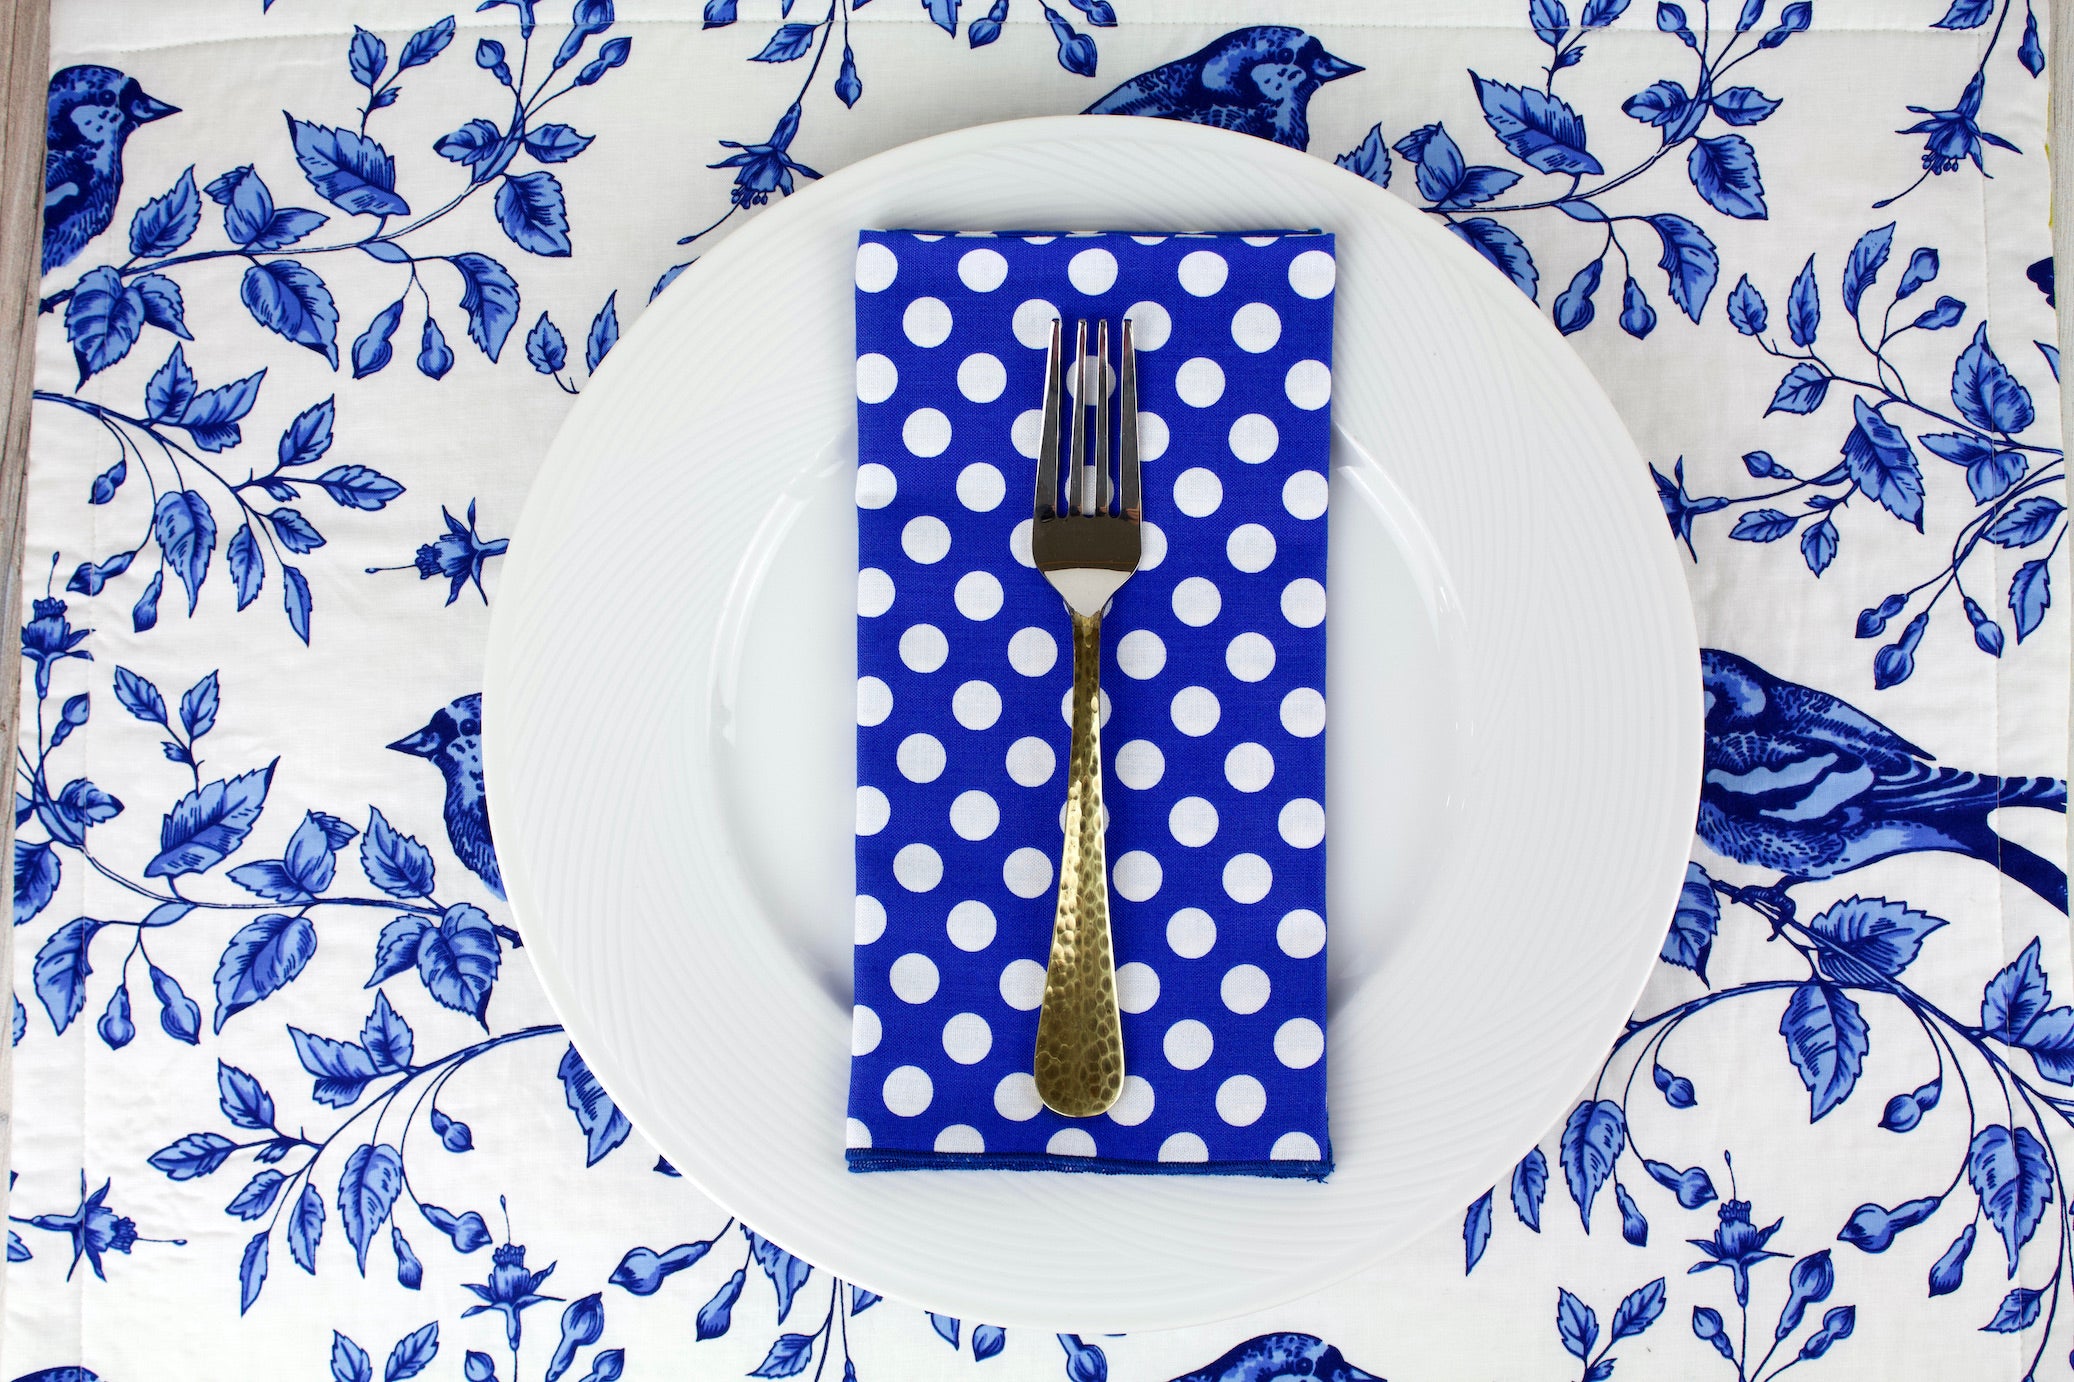 Blue Polka Dot Napkins (Set of 4)-The Blue Peony-Category_Napkins,Category_Table Linens,Color_Blue,Department_Kitchen,Material_Cotton,Pattern_Polka Dot